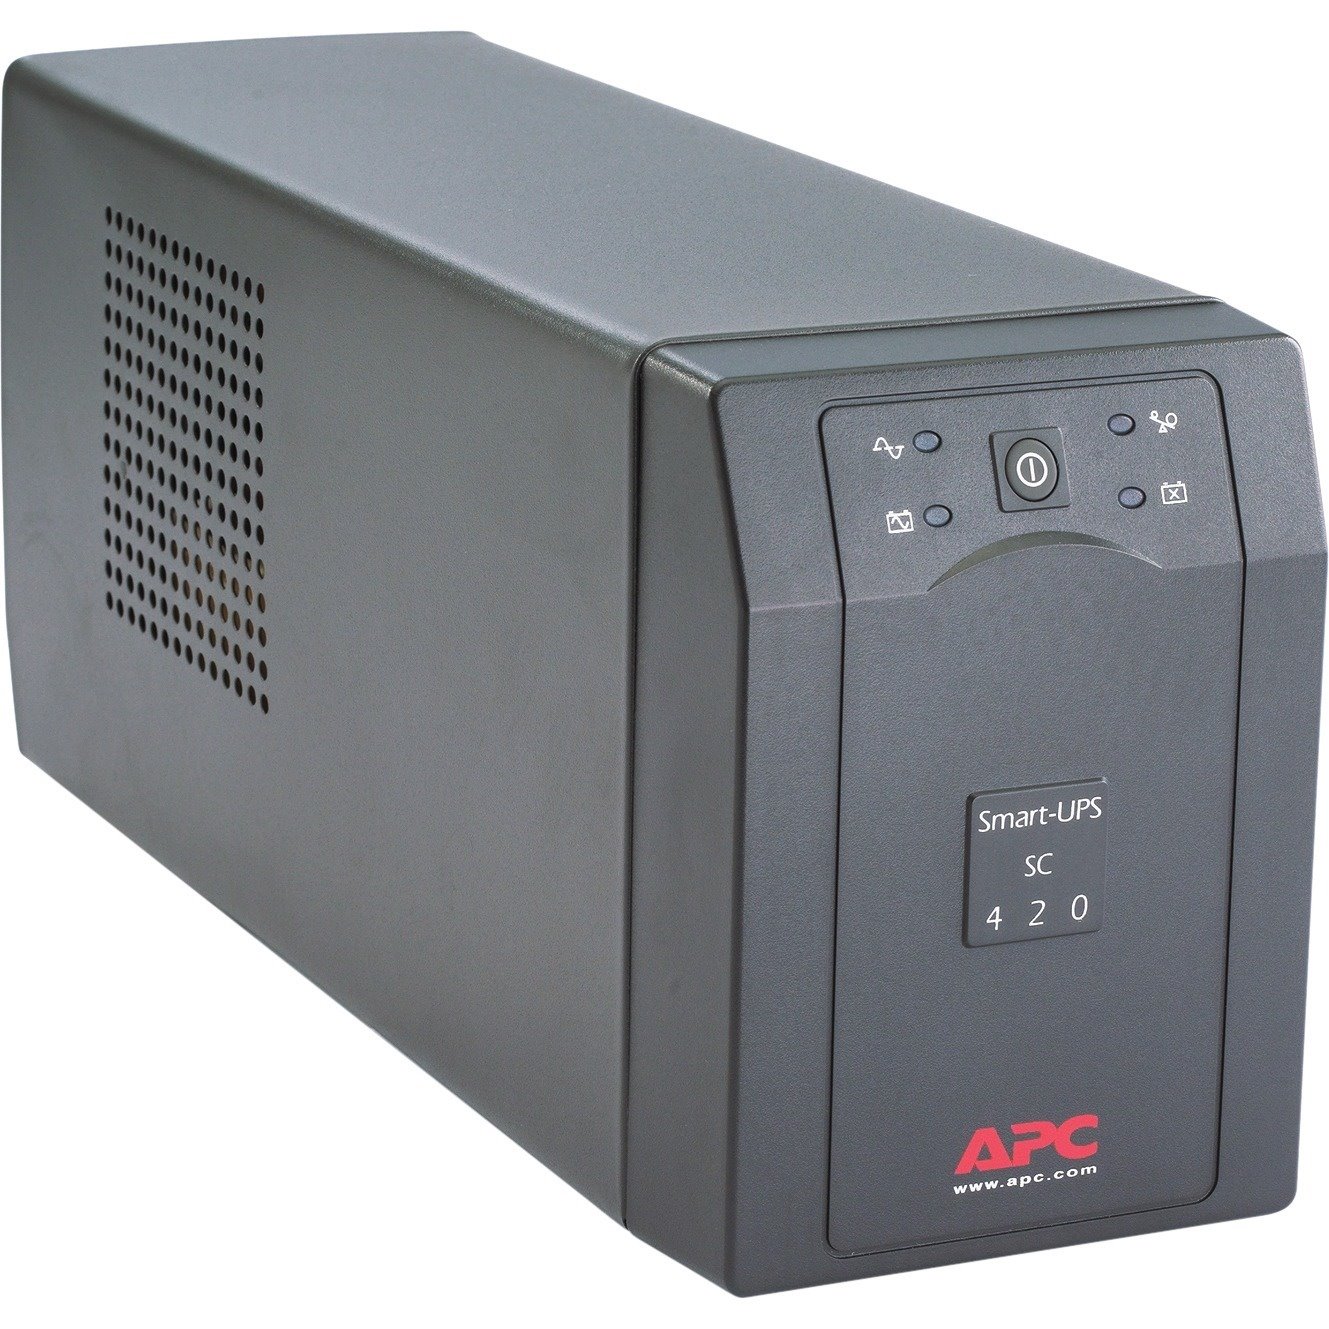 Buy SC420I APC by Schneider Electric Smart-UPS Line-interactive UPS ...